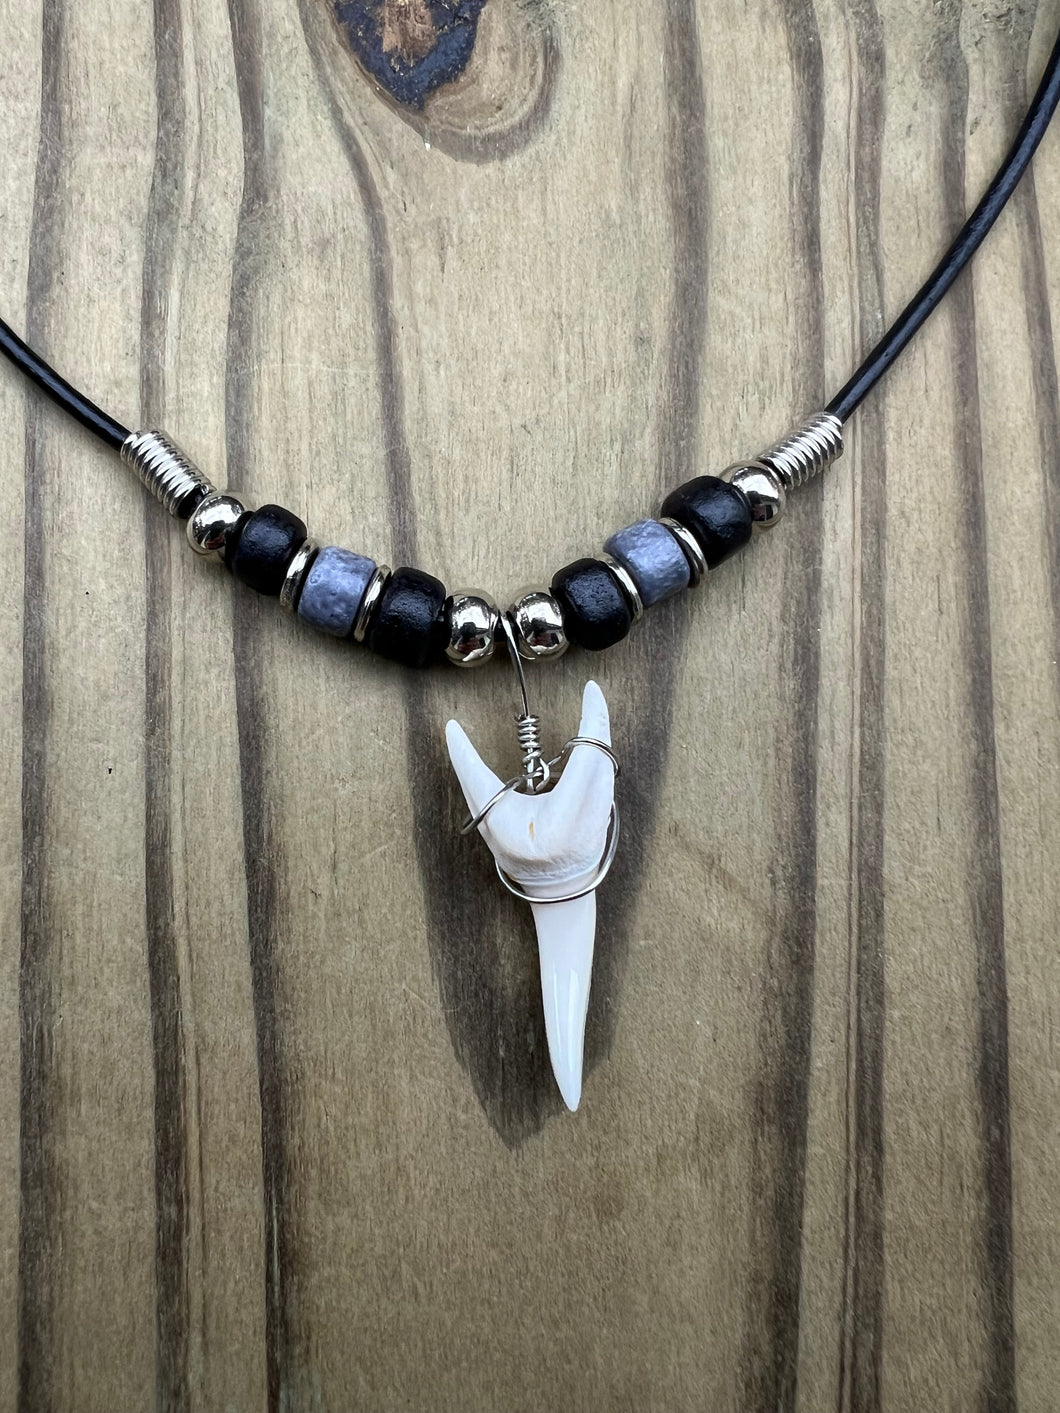 White Shark Tooth Necklace With Black and Gray Beads